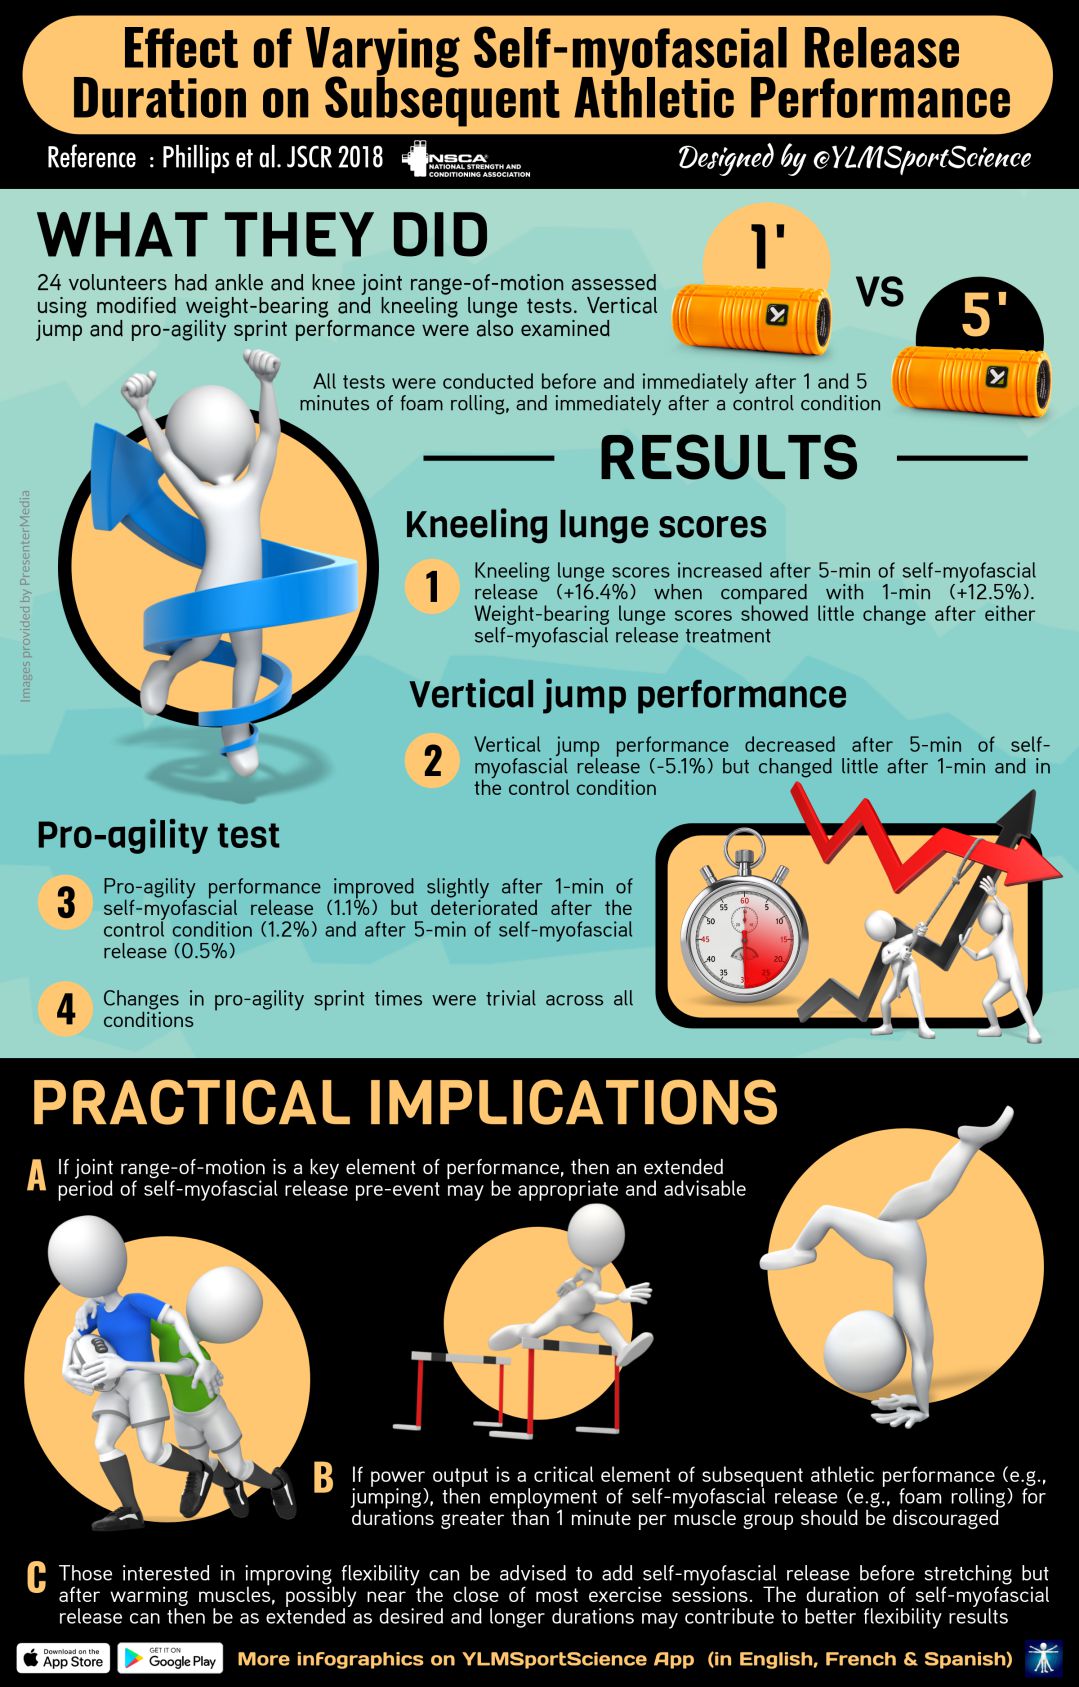 This infographic summarizes the results of a study that looked at the effects of different durations of SMR on athletic performance.